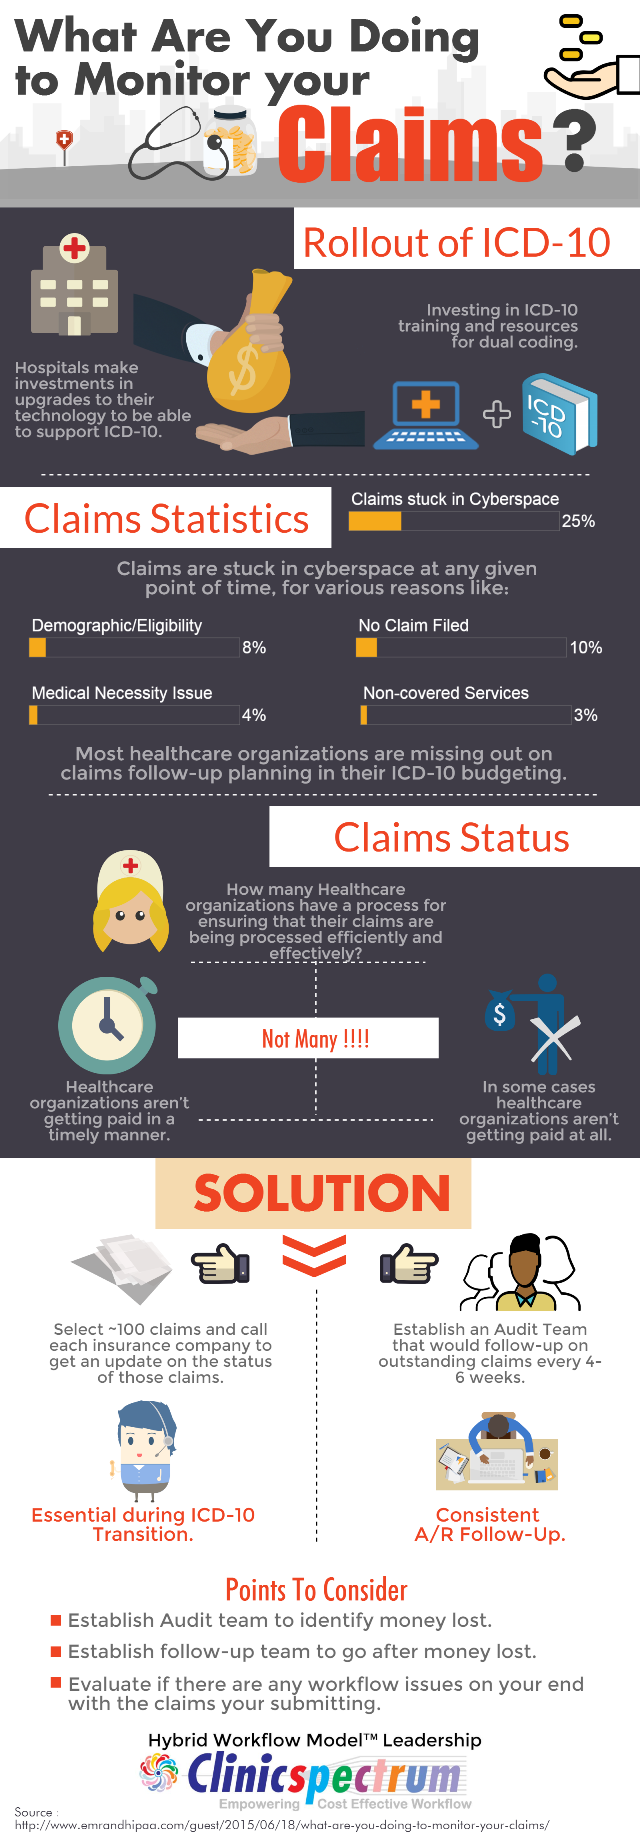 Infographic Courtesy of ClinicSpectrum/EMR and HIPAA